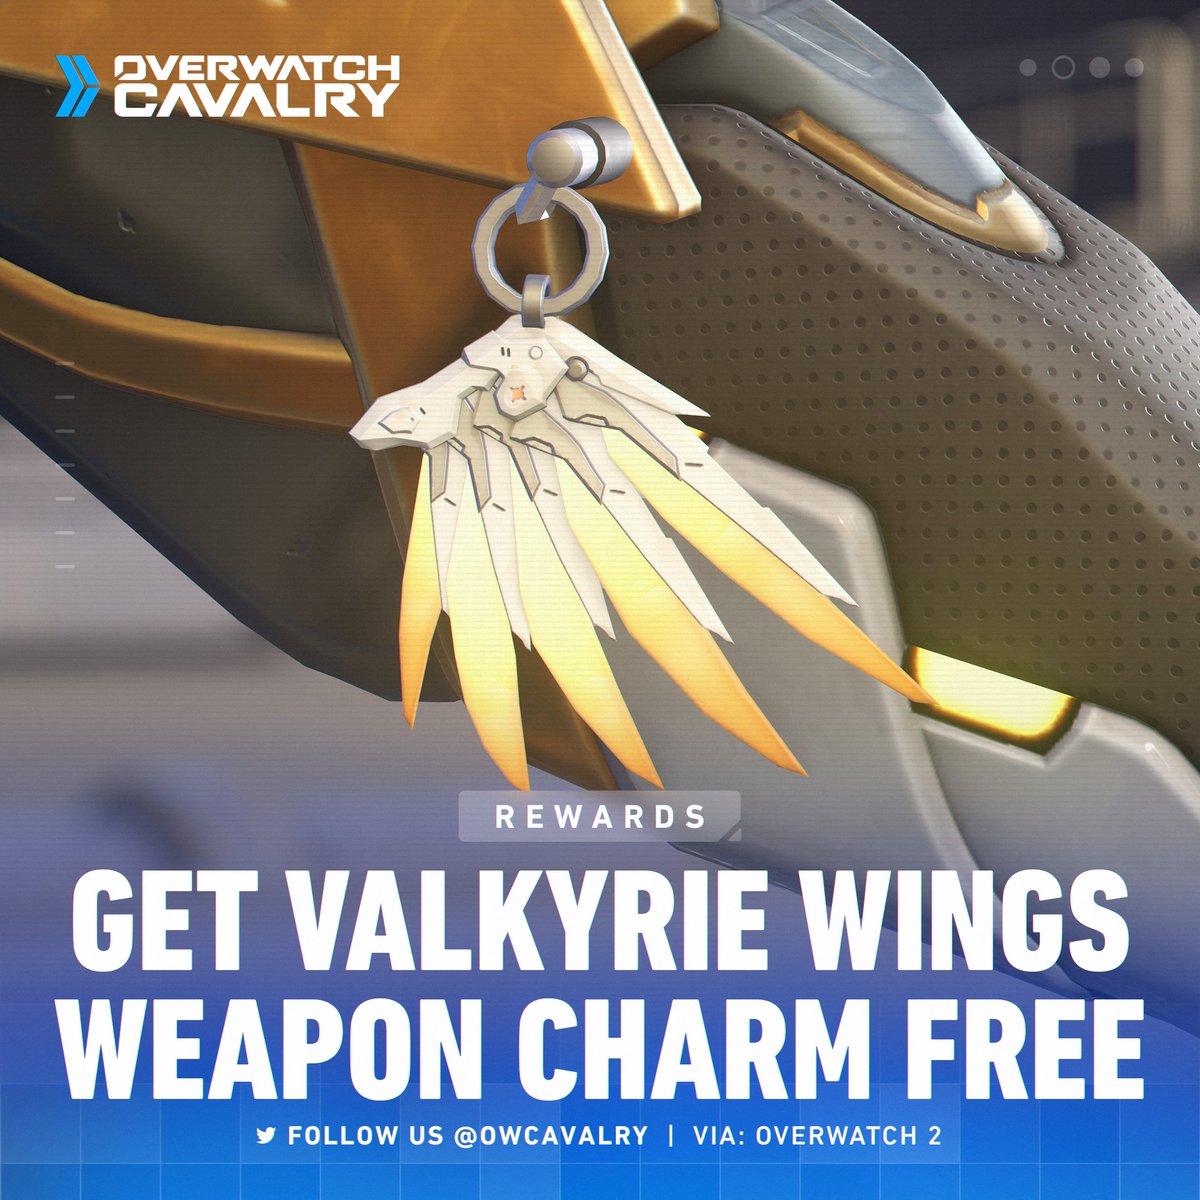 Get the Valkyrie Wings Weapon Charm for FREE in #Overwatch2 🪽

The reward will be available in the in-game shop for 0 Overwatch Coins until the next rotation, coming July 4 🛒

Next Week's Reward: Sprinkles Mei (Legendary) 🍦